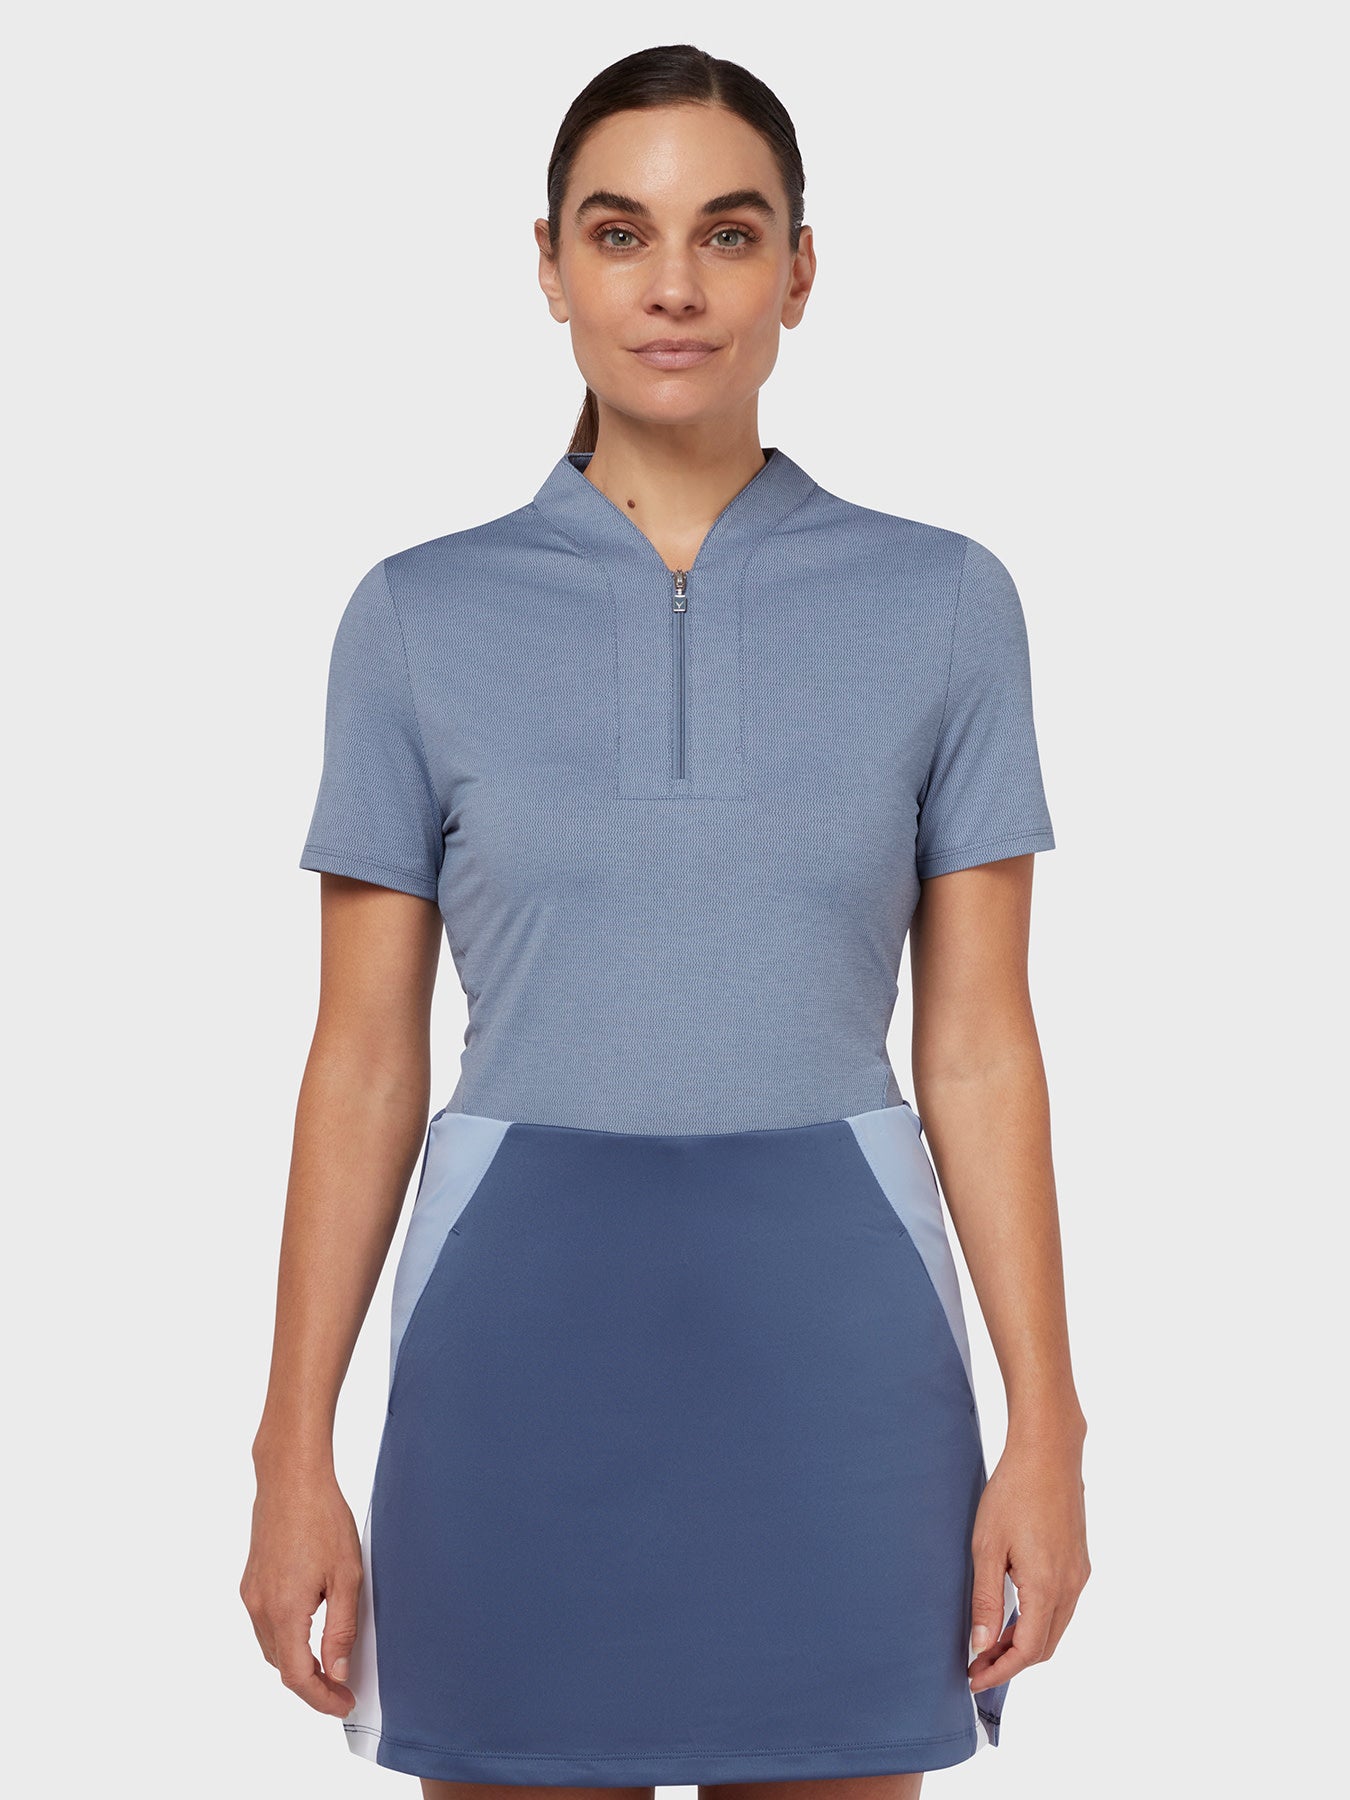 View Texture Womens Polo In Blue Indigo Heather information